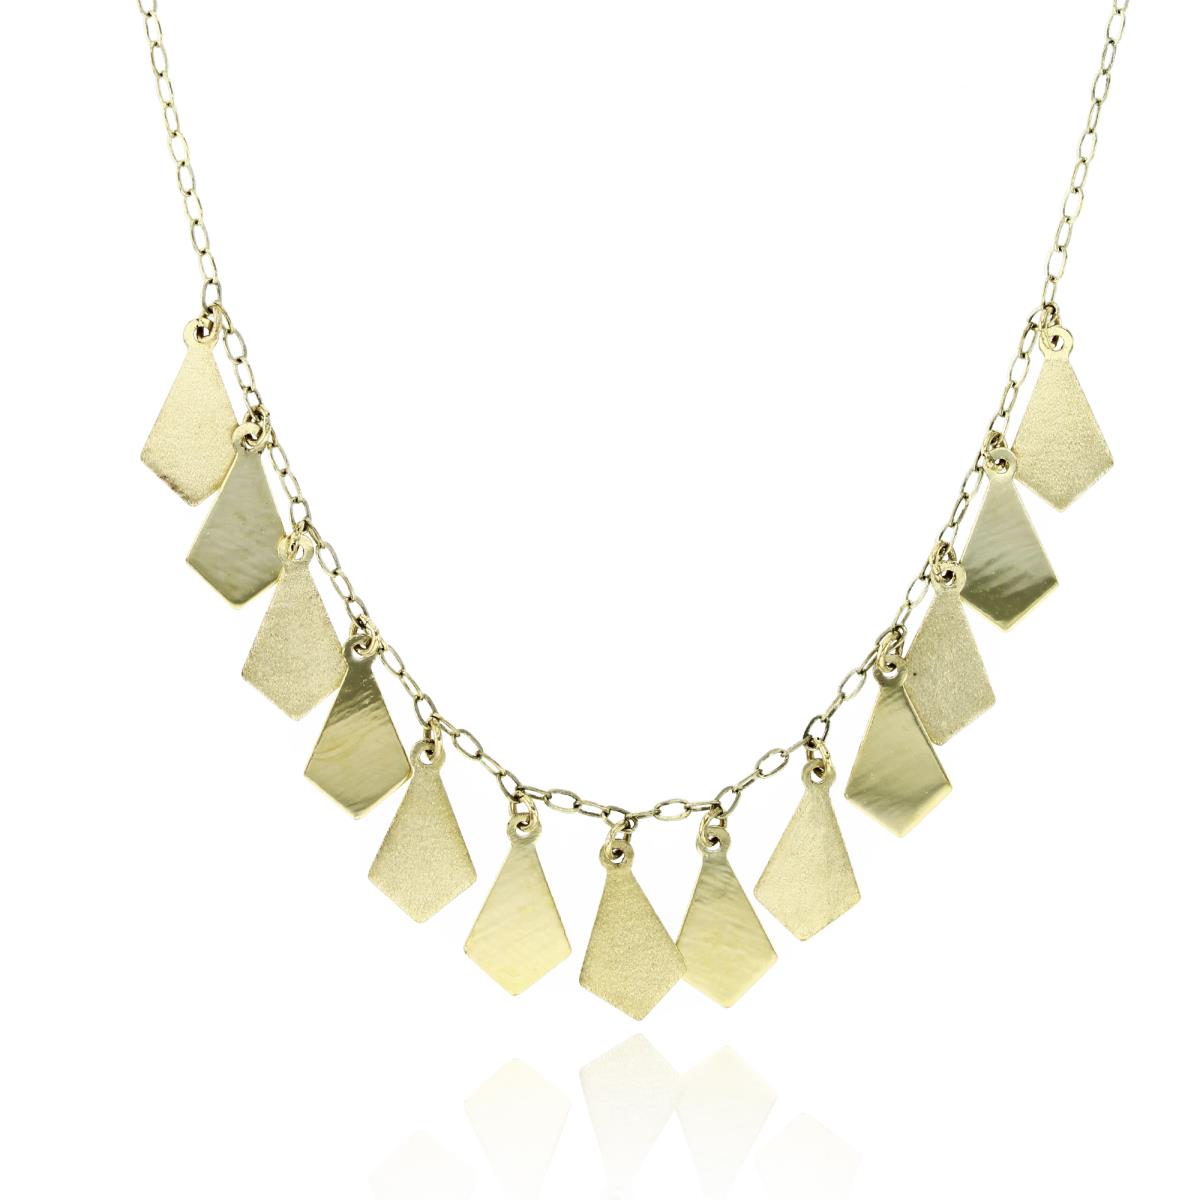 14K Yellow Gold Polished Kite Dangling 17" Necklace